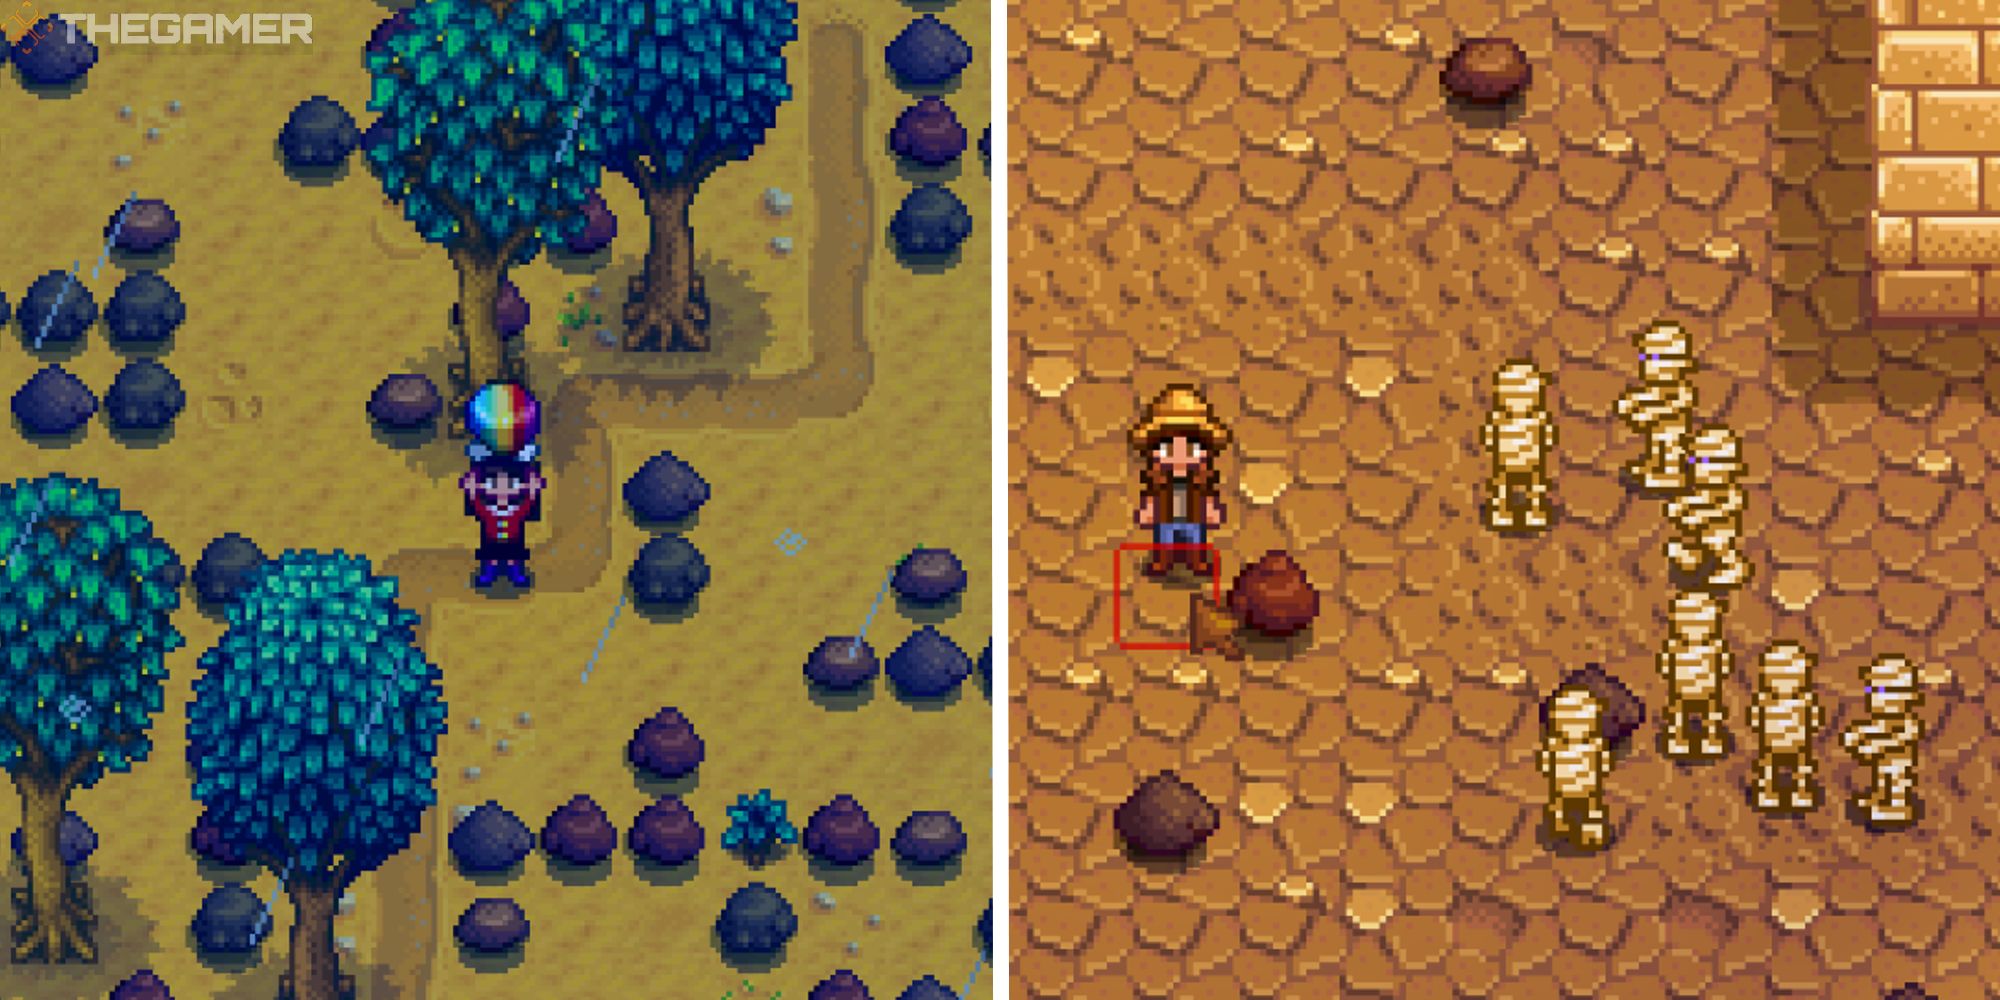 split image showing player in quarry with prismatic shard, next to image of player in skull cavern with mummies